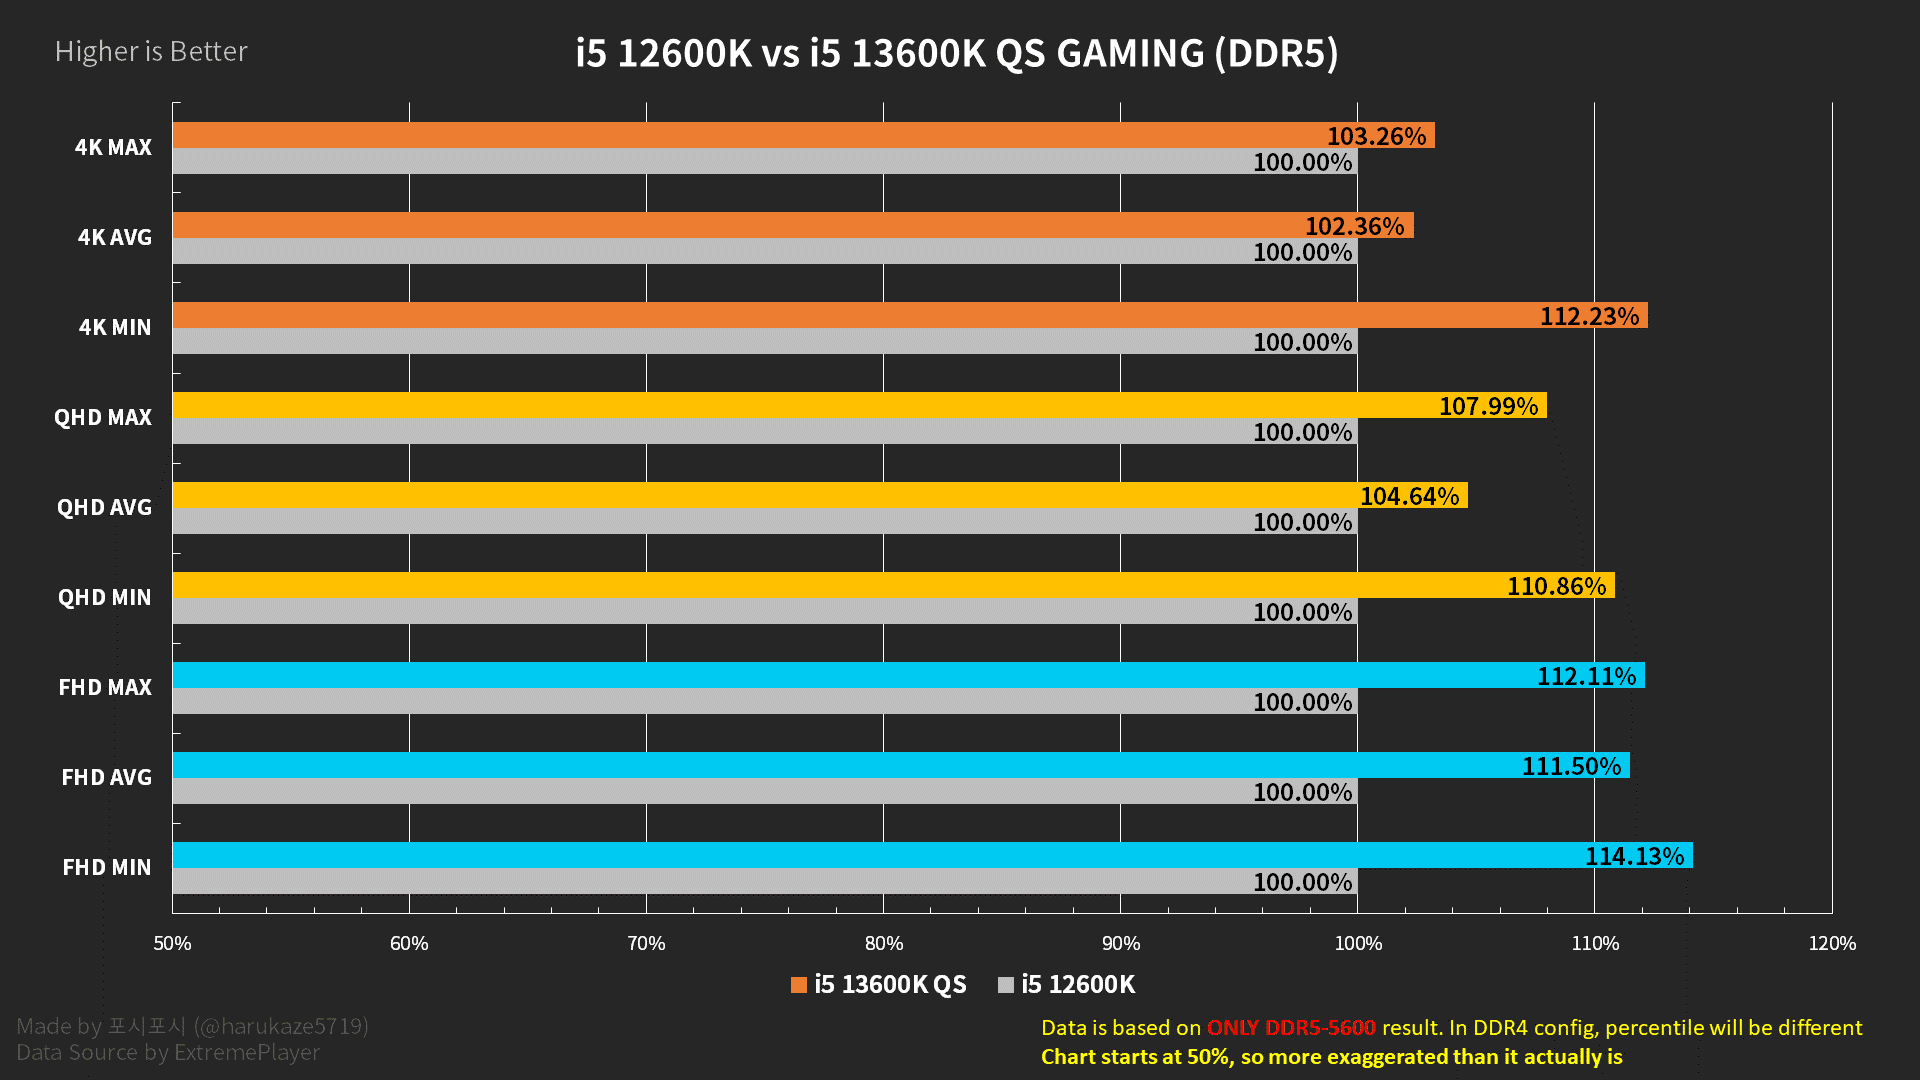 Core i5-12600K vs. Core i5-13600K(ES) with DDR4 and DDR5